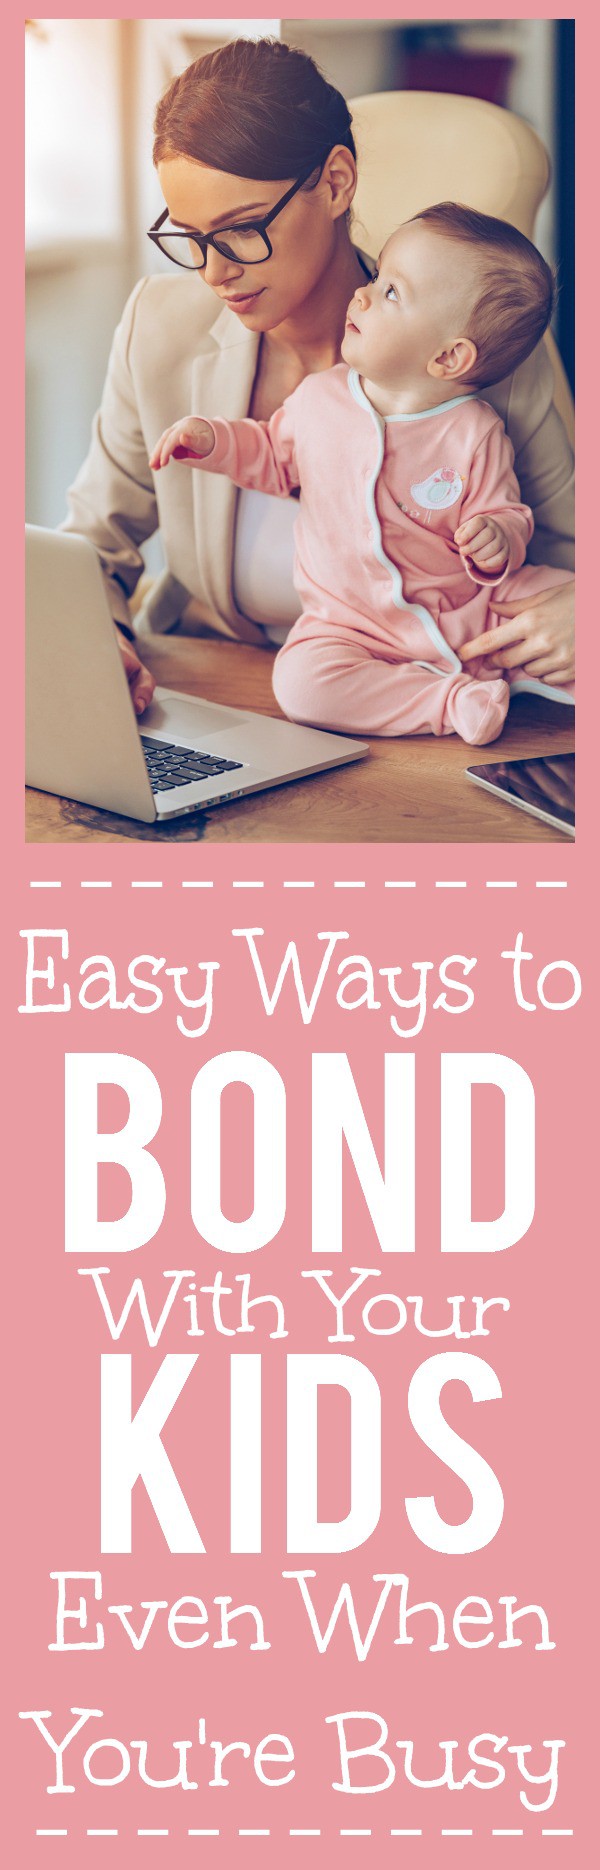 8 Easy Ways to Bond with Your Kids Even When You're Busy - Being busy isn't an excuse for not spending time with your kids! You can still bond and connect even with a hectic schedule, just check out these 8 Easy Ways to Bond with Your Kids When You're Busy.